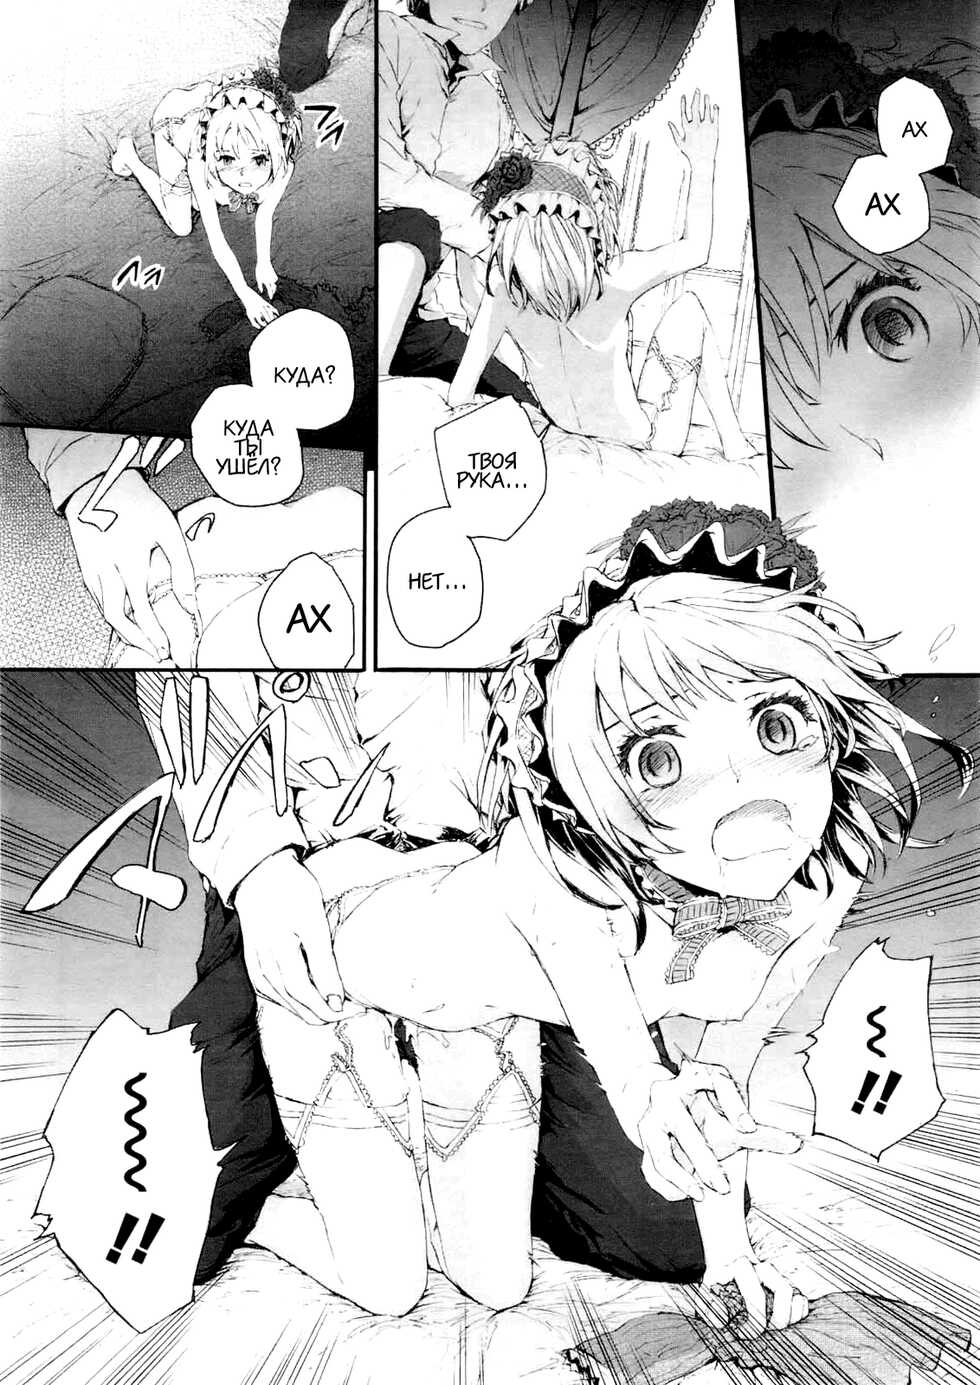 [Sumiya] Gothic | Готика (COMIC LO 2010-09) [Russian] [LoliconTeam] - Page 16